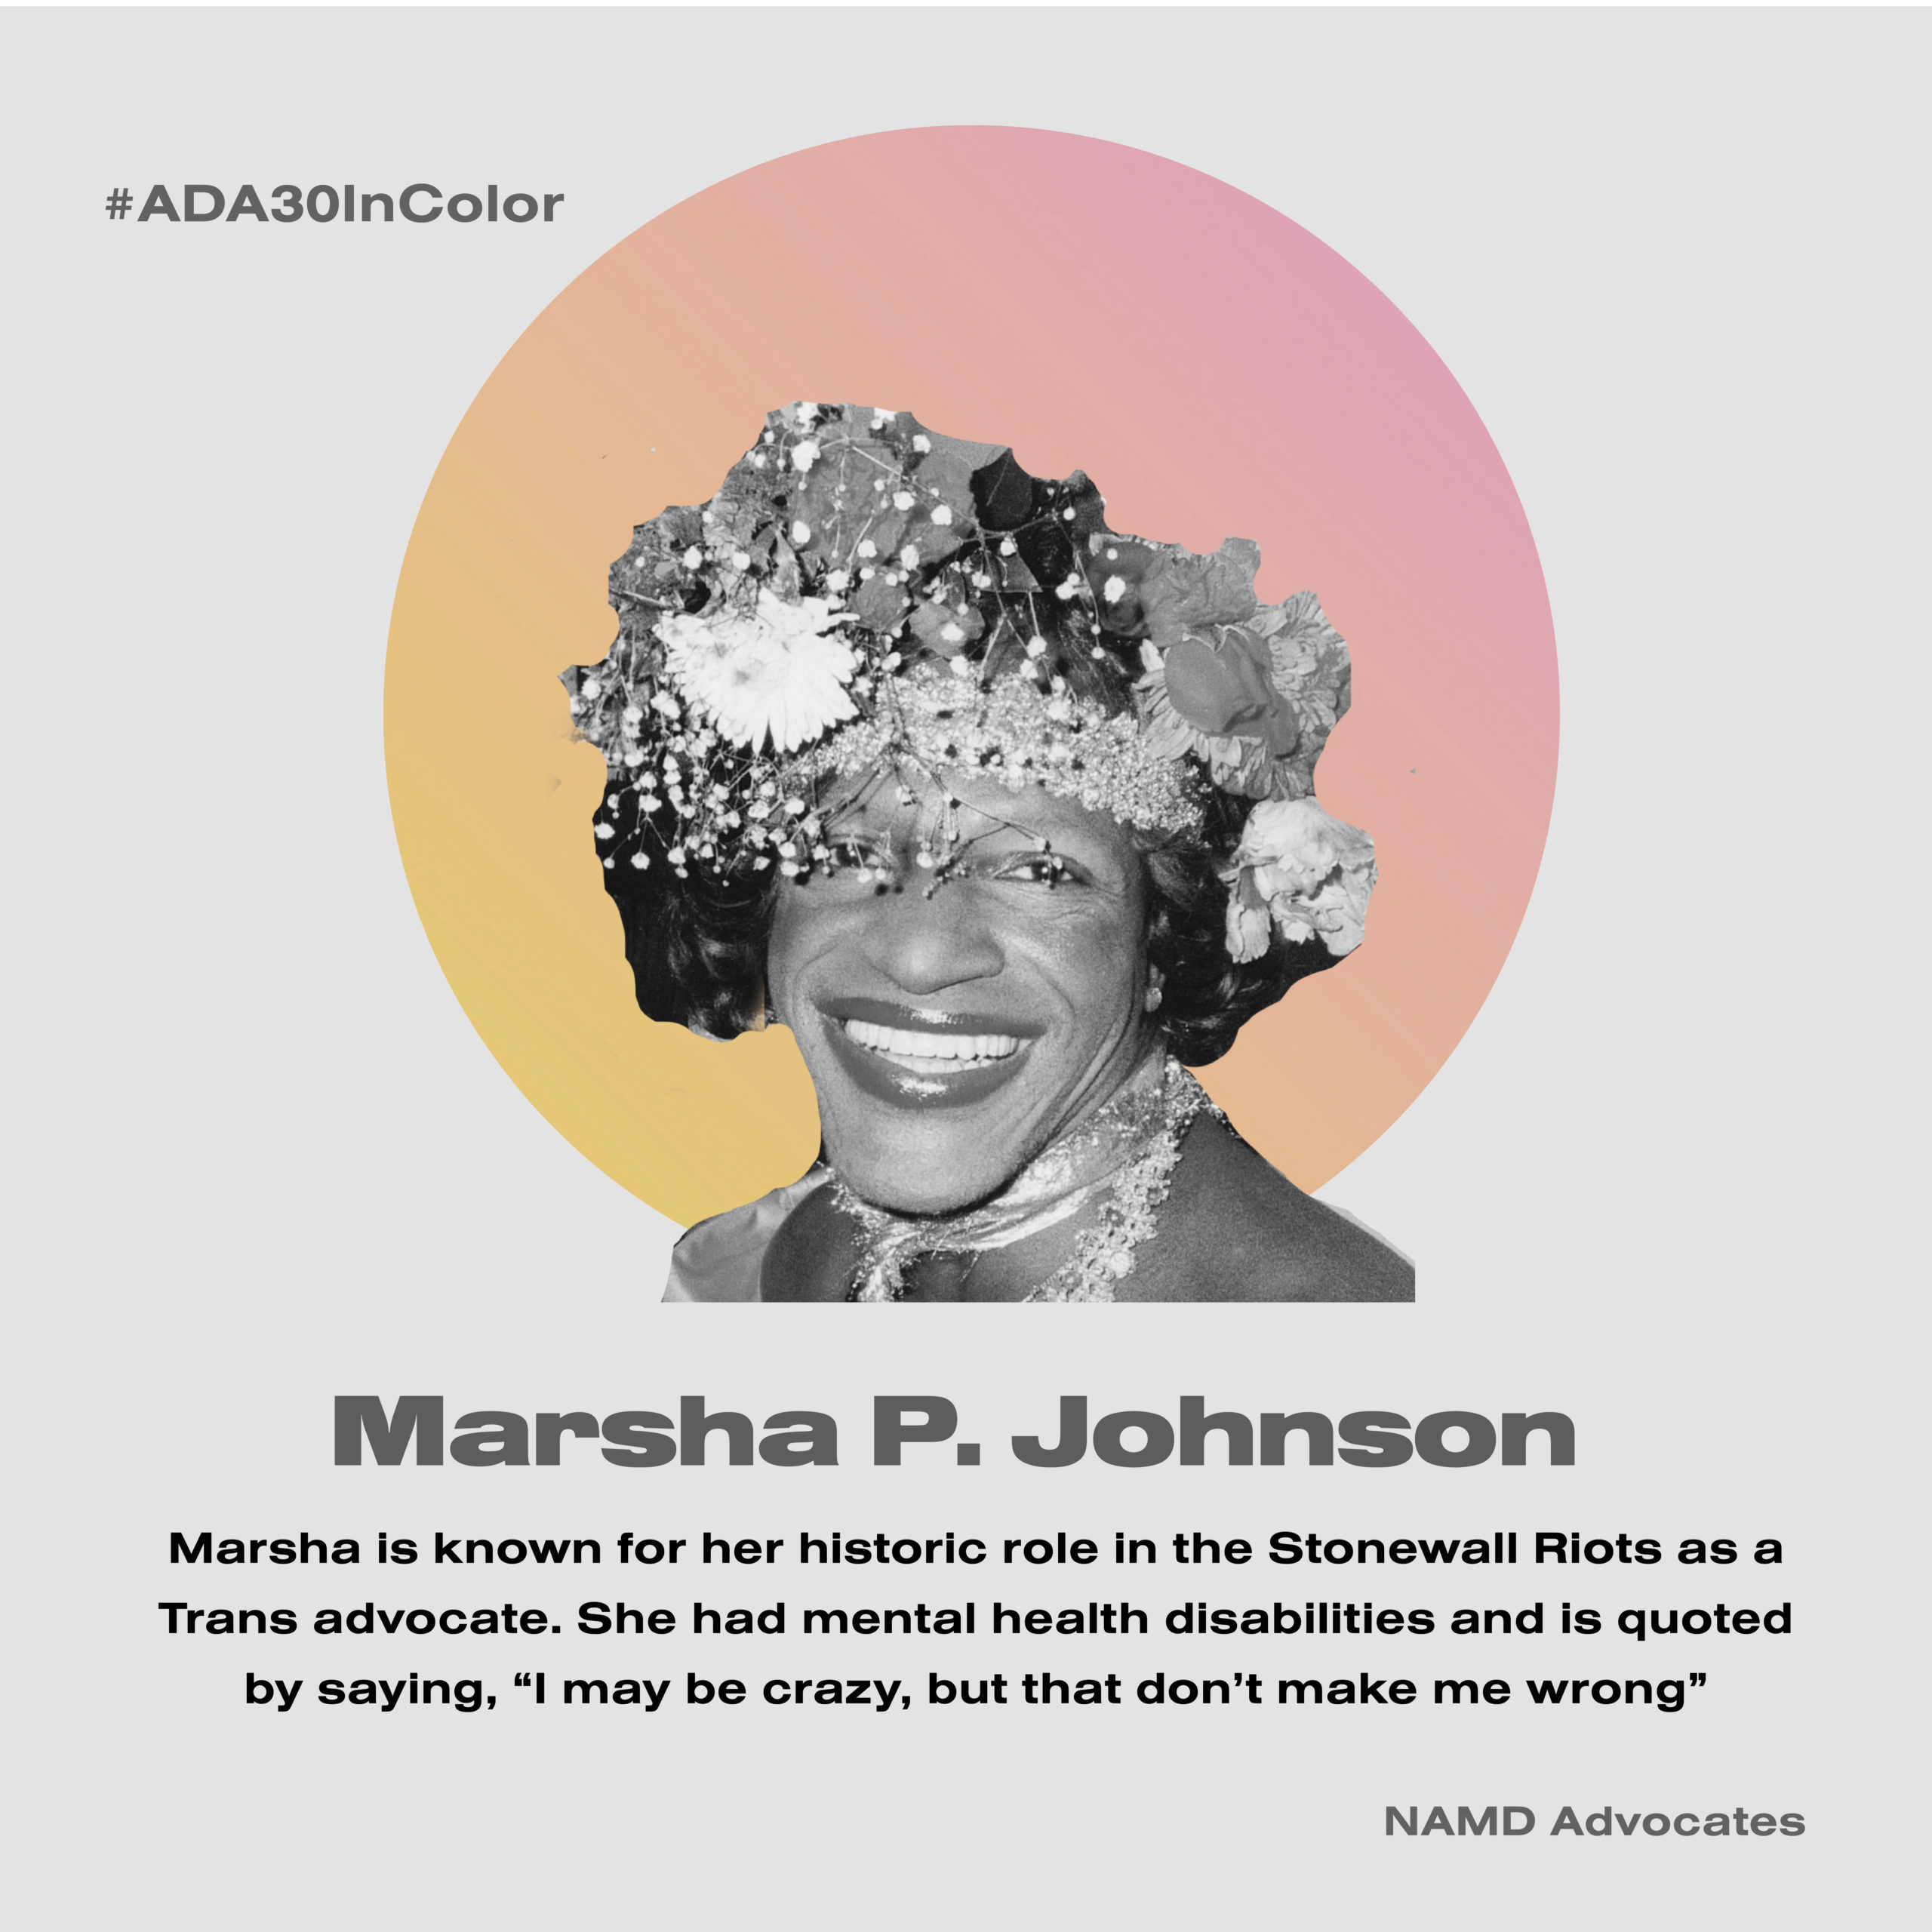 Marsha P. Johnson. Marsha is known for her historic role in the Stonewall Riots as a Trans advocate. She had mental health disabilities and is quoted by saying, “I may be crazy, but that don’t make me wrong.”